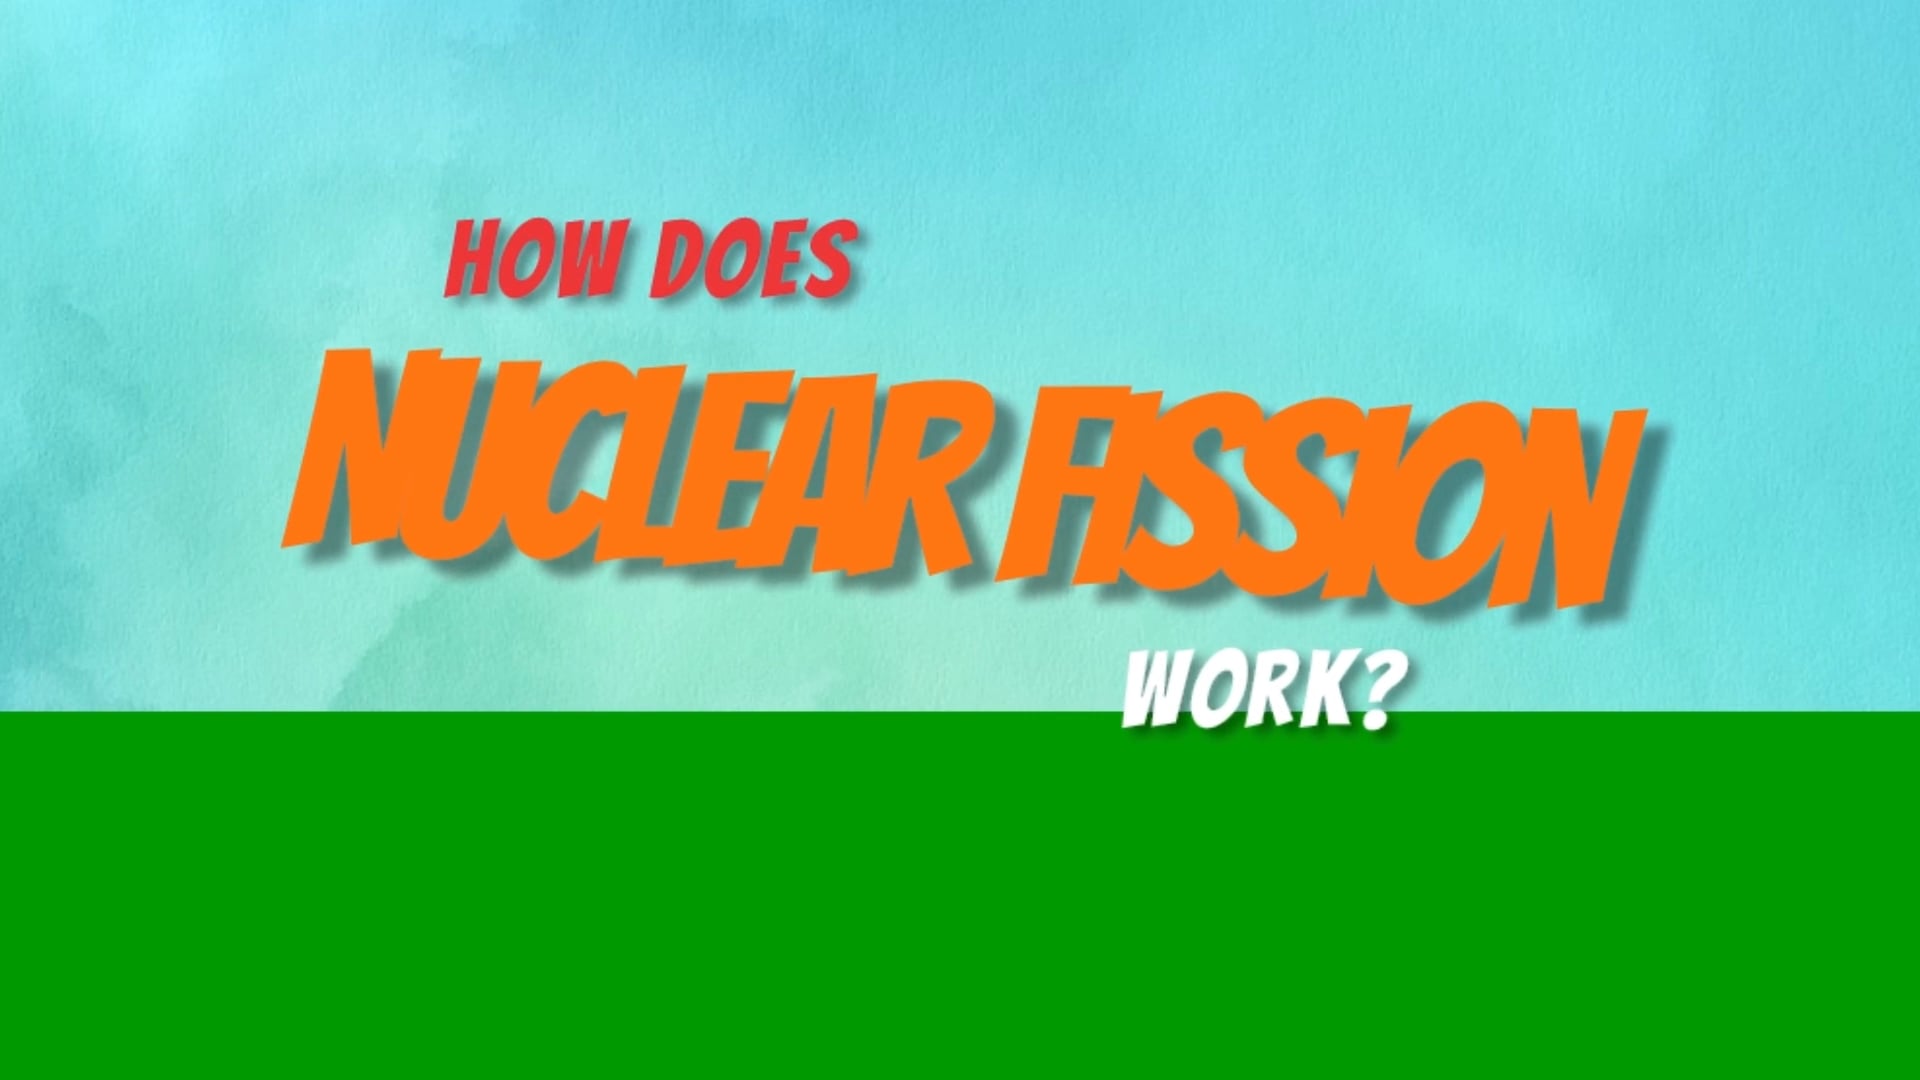 How Does Nuclear Fission Work?